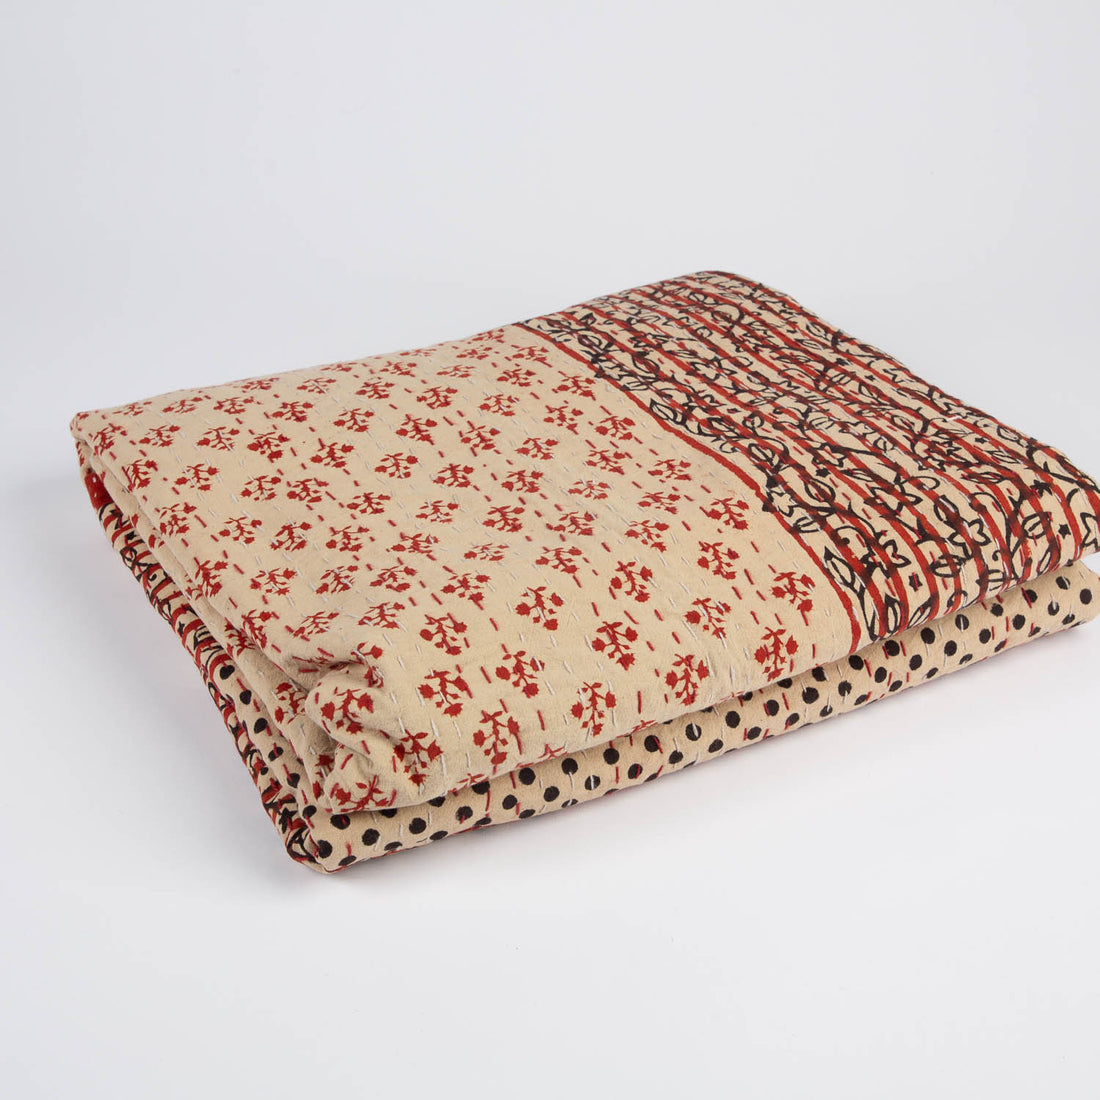 Kantha Quilt - Red and Tan